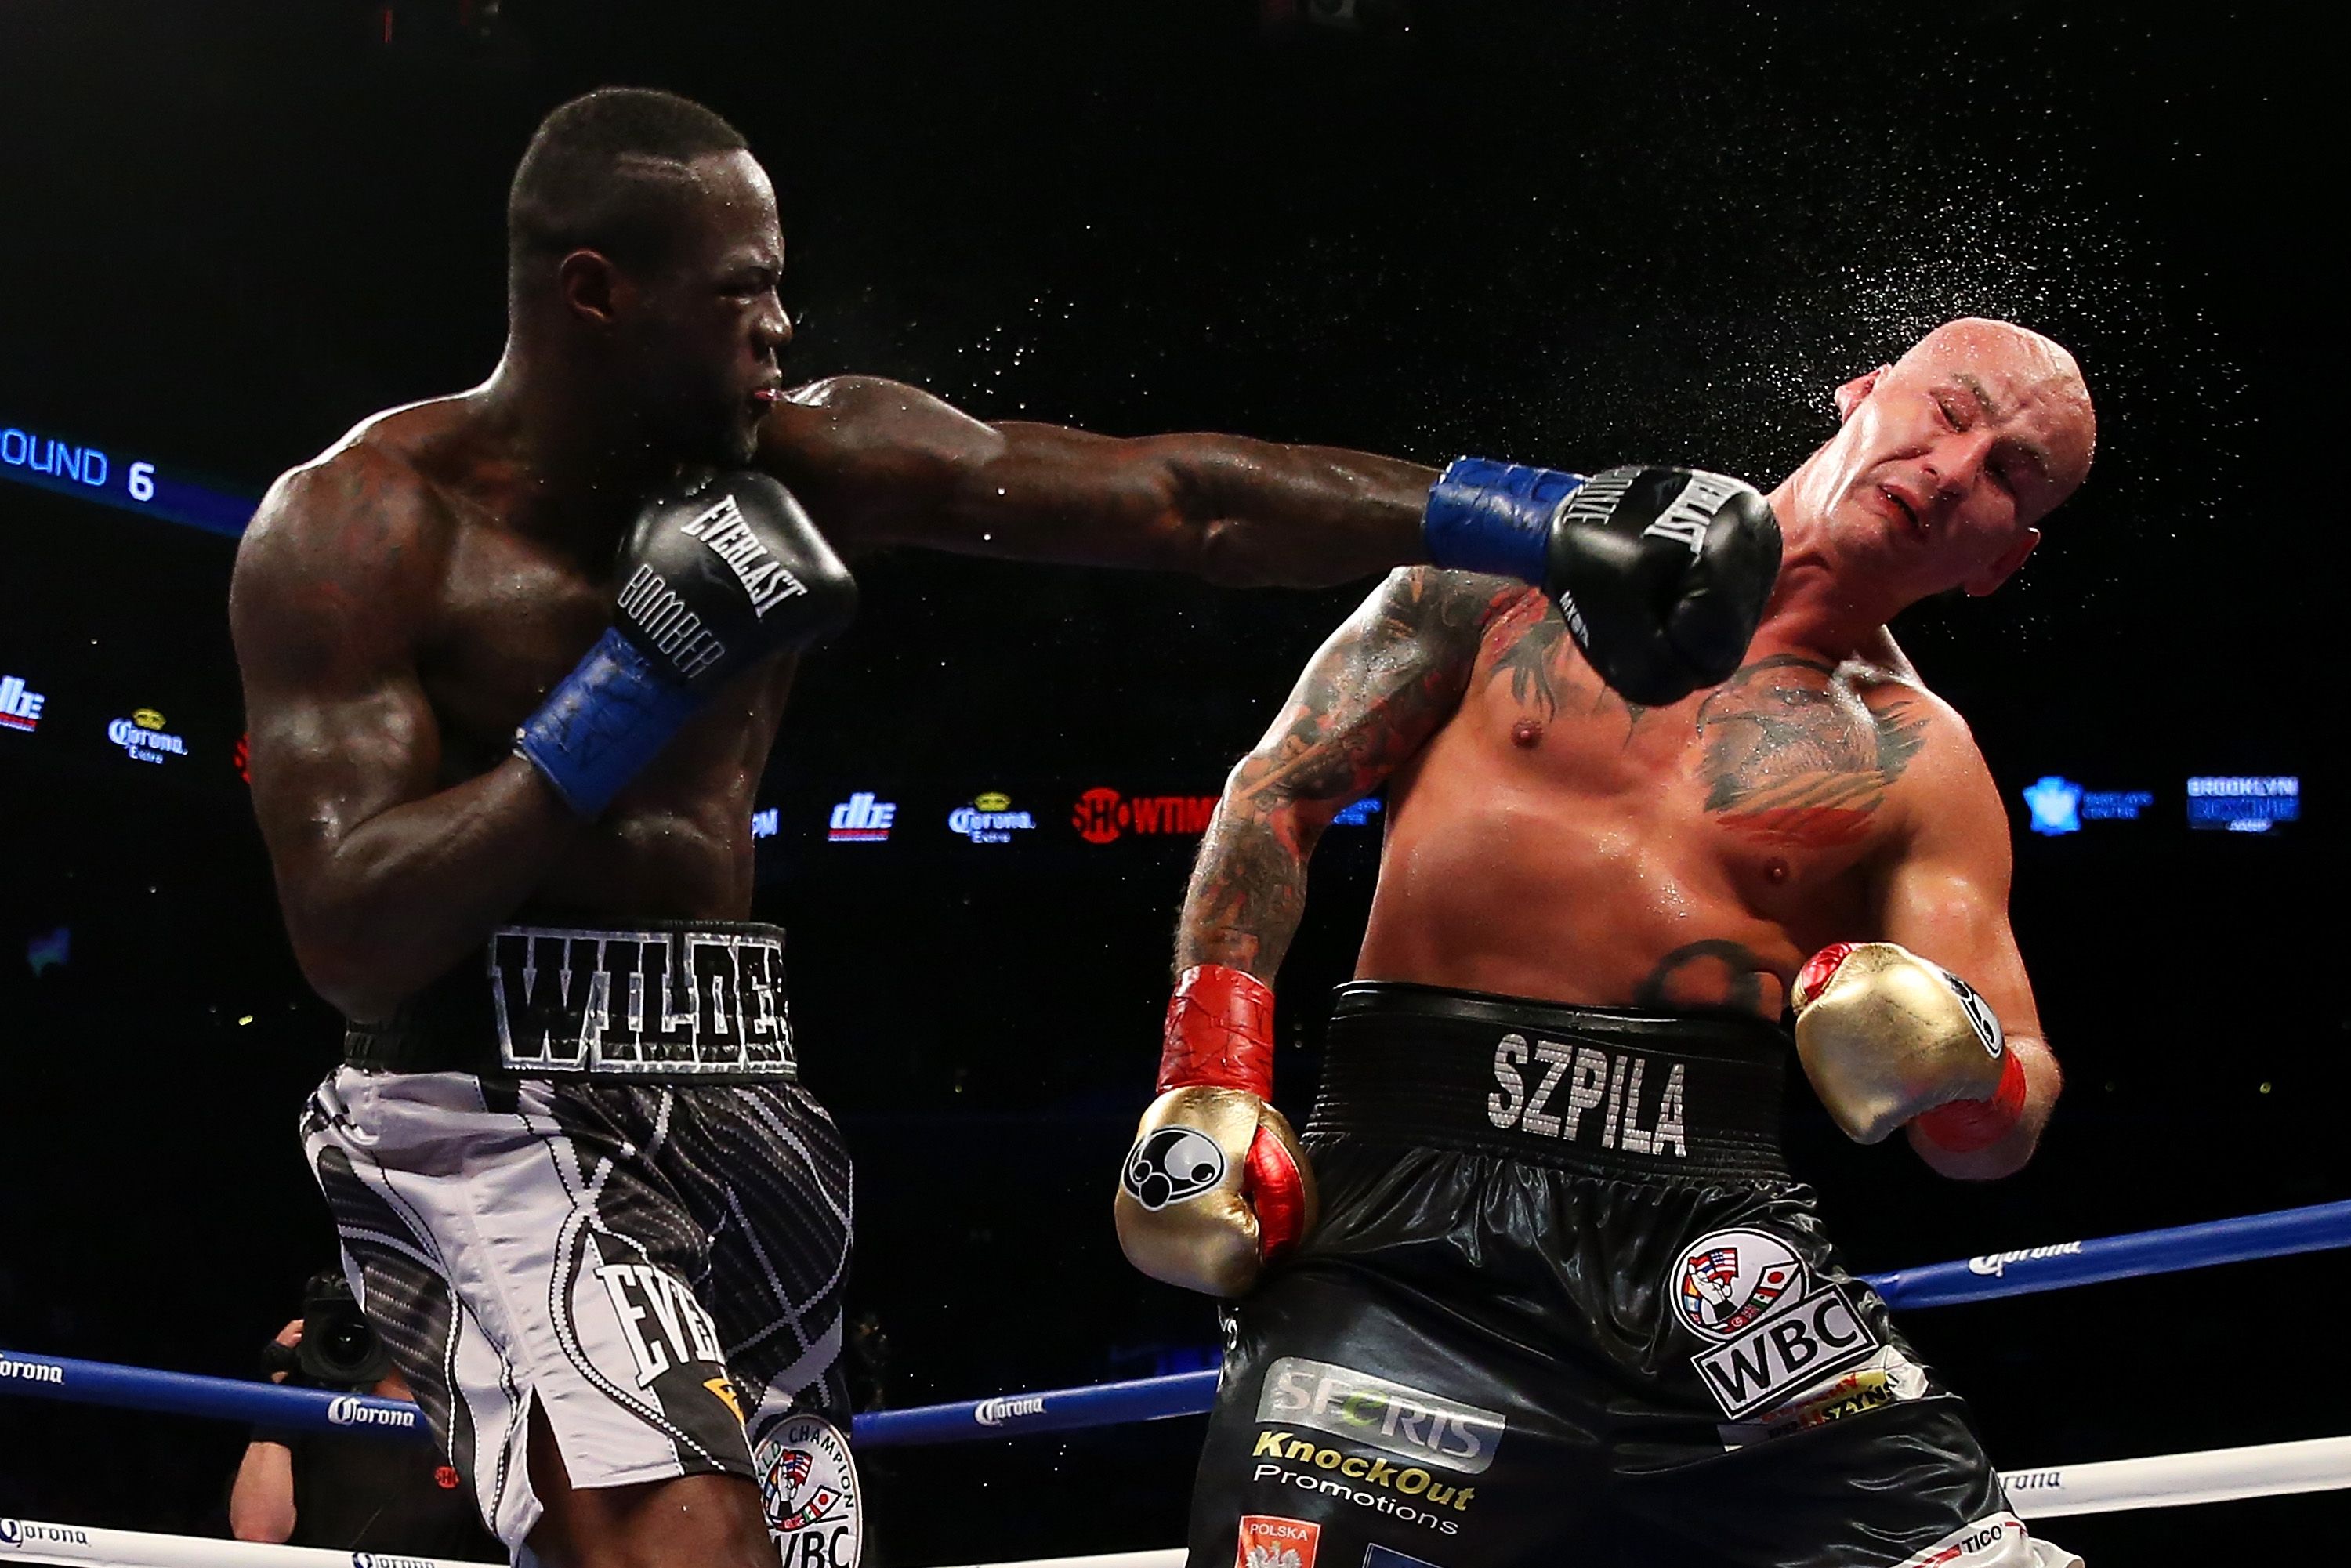 Mike Tyson or Deontay Wilder? Heavyweights punching power compared